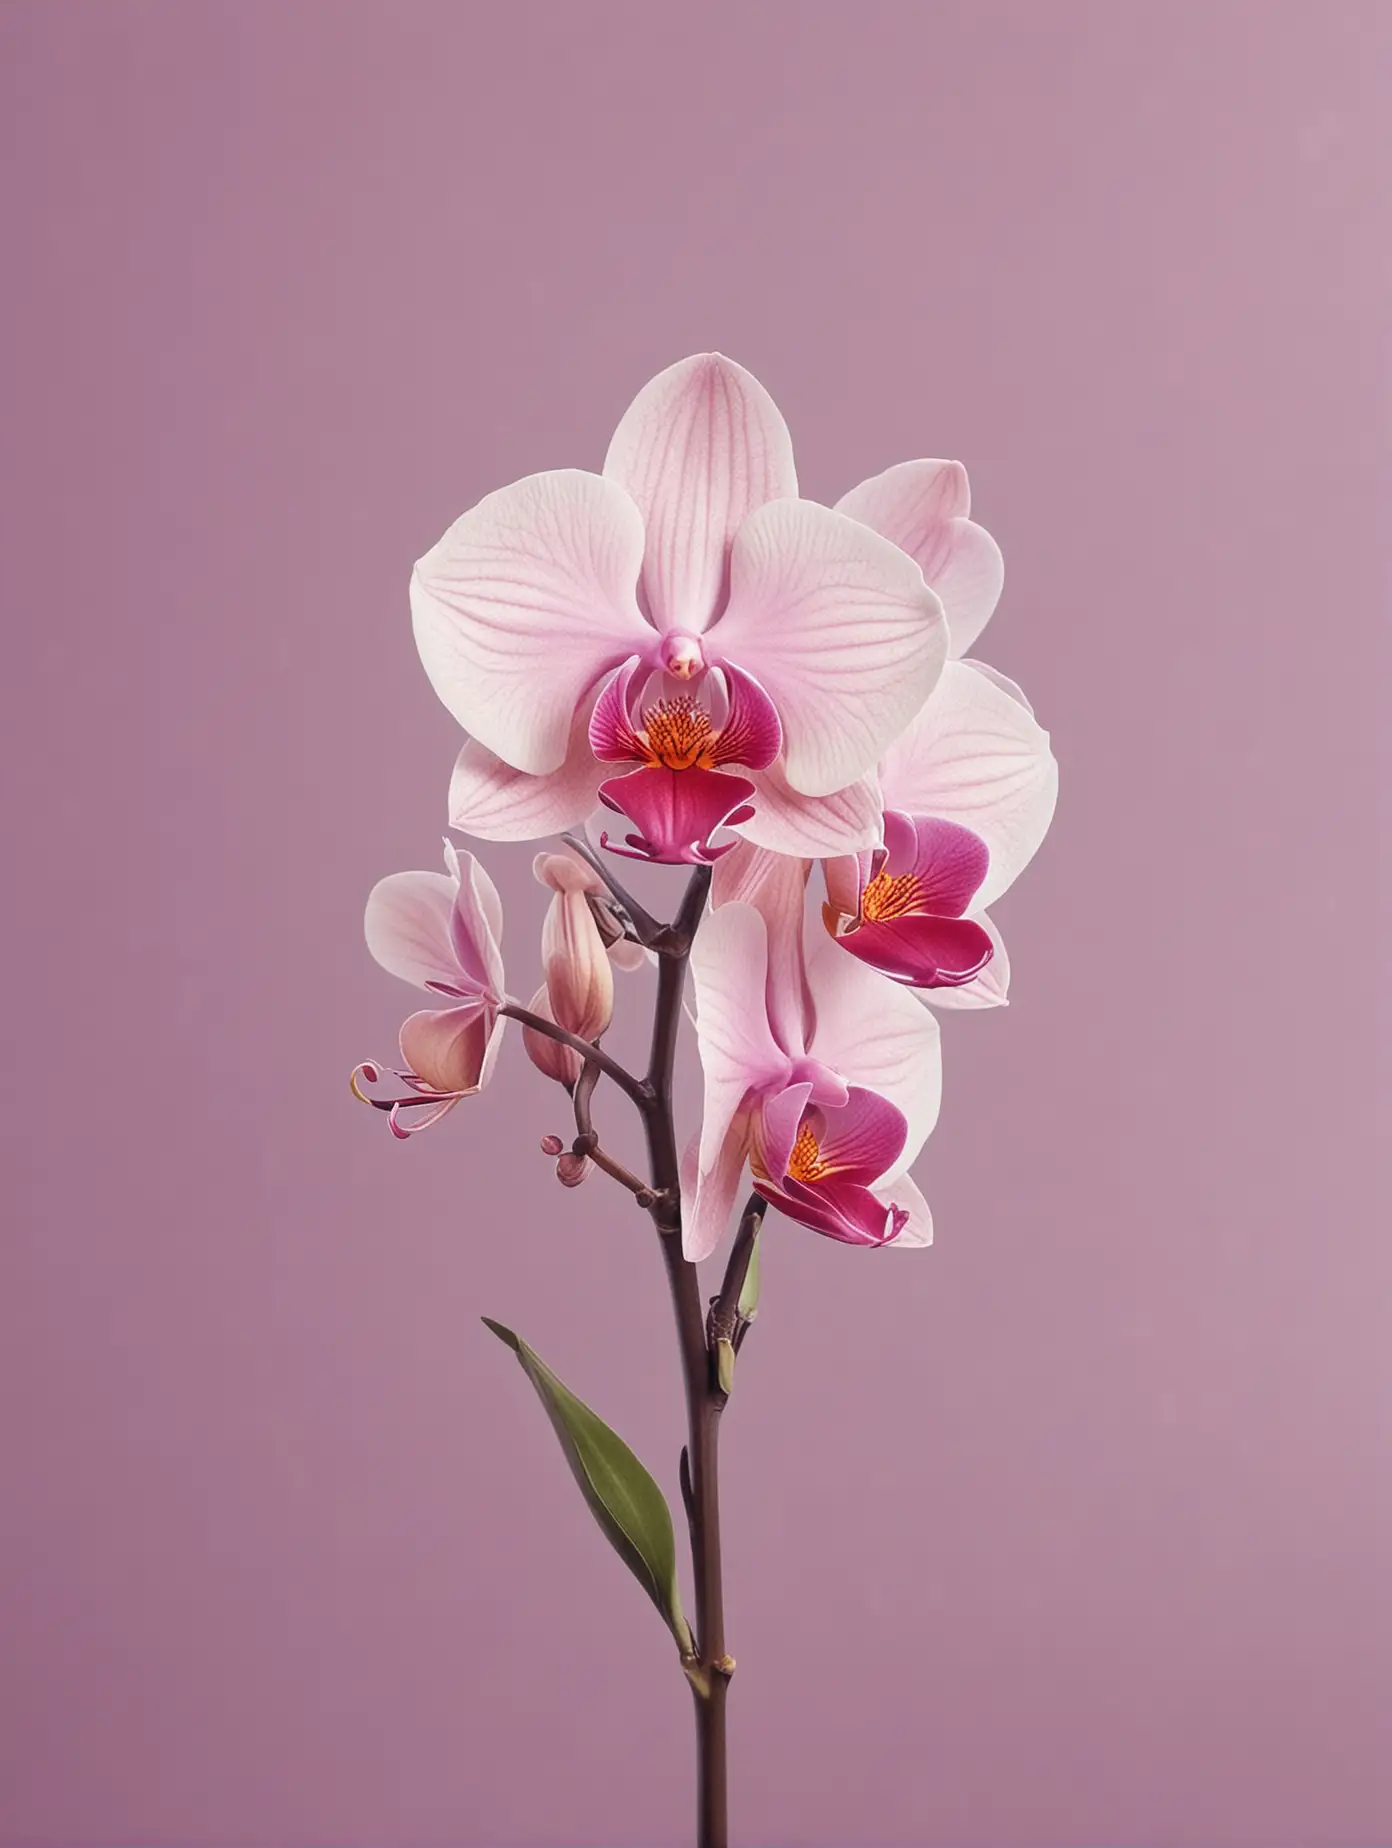 simple yet vibrant orchid that can be used as a logo
